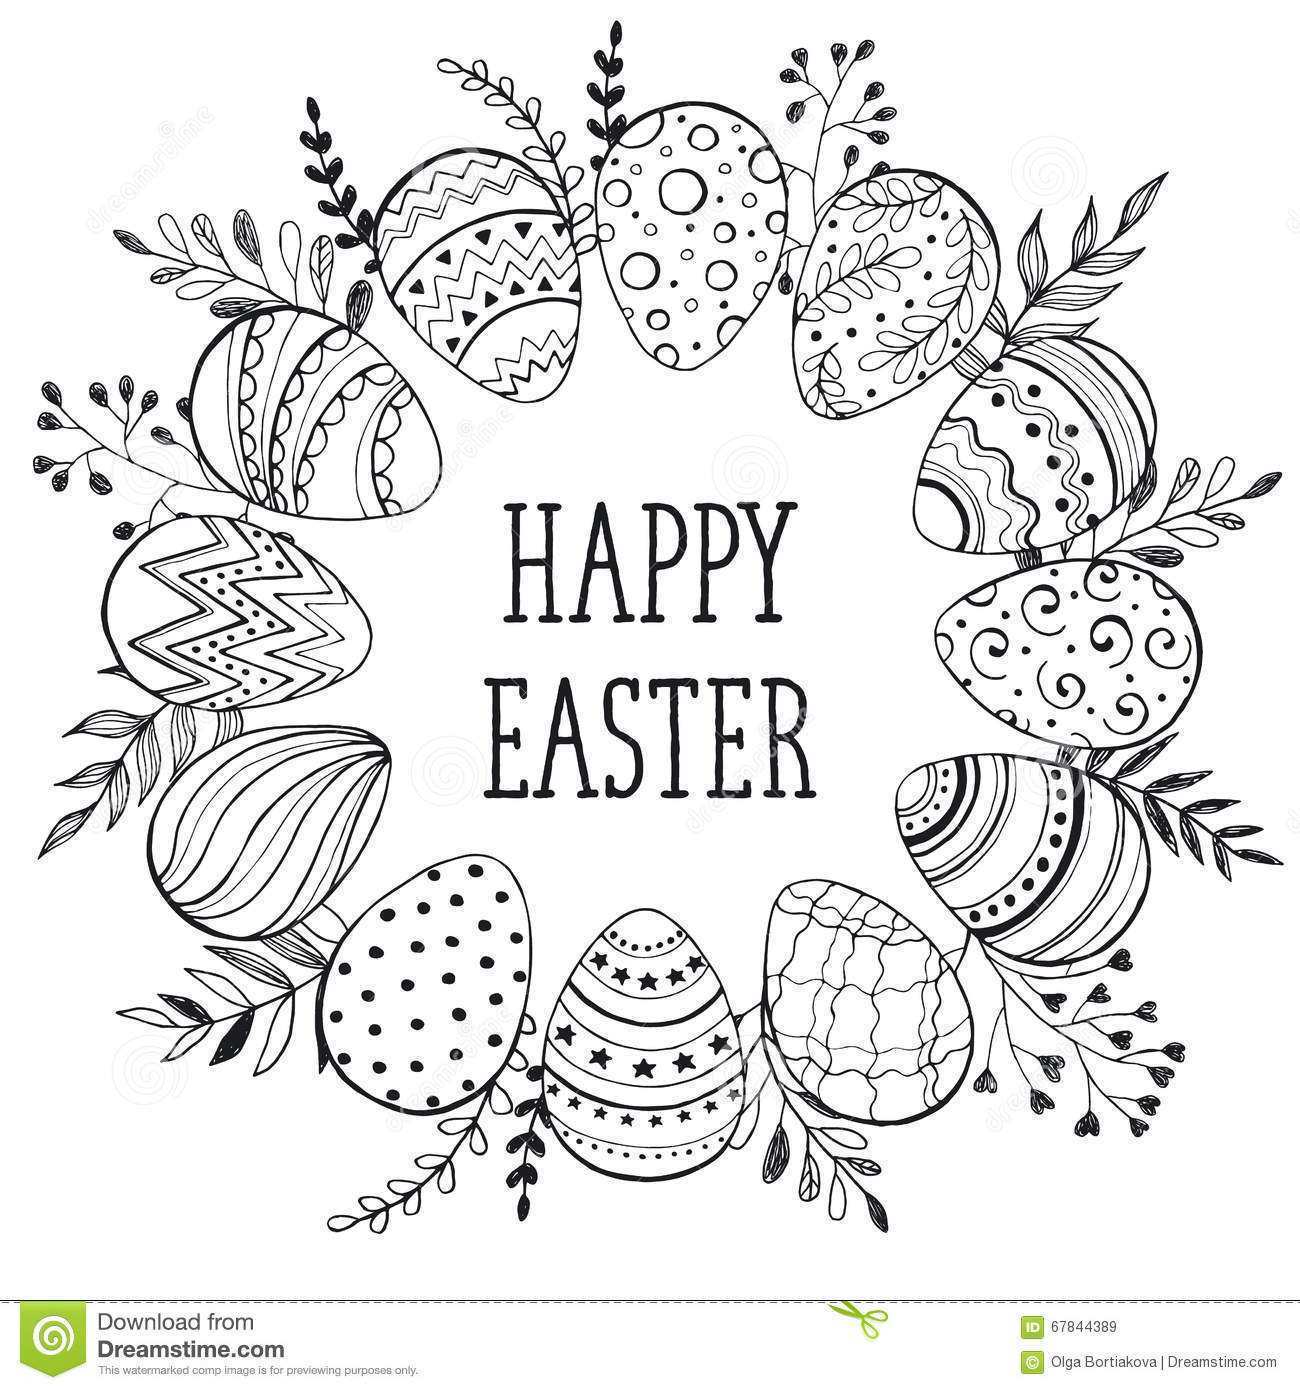 34 Best Easter Card Black And White Templates Templates for Easter Card Black And White Templates